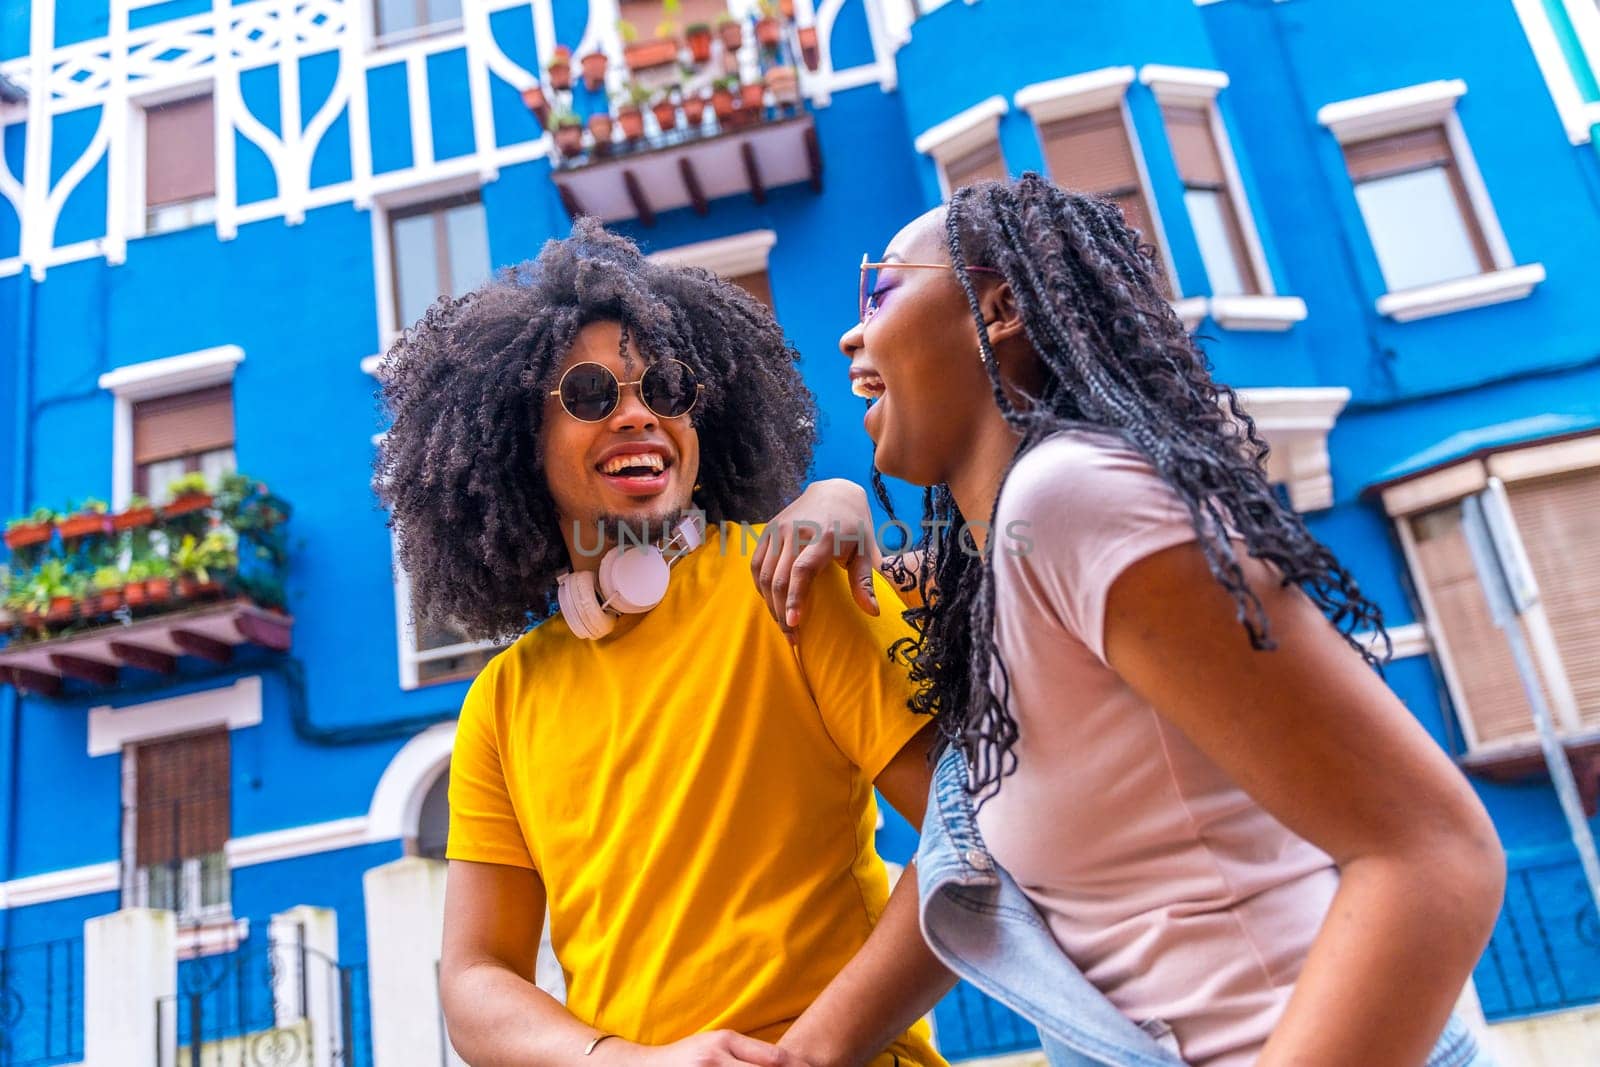 Happy afro casual friends strolling in a neighborhood with blue colorful houses